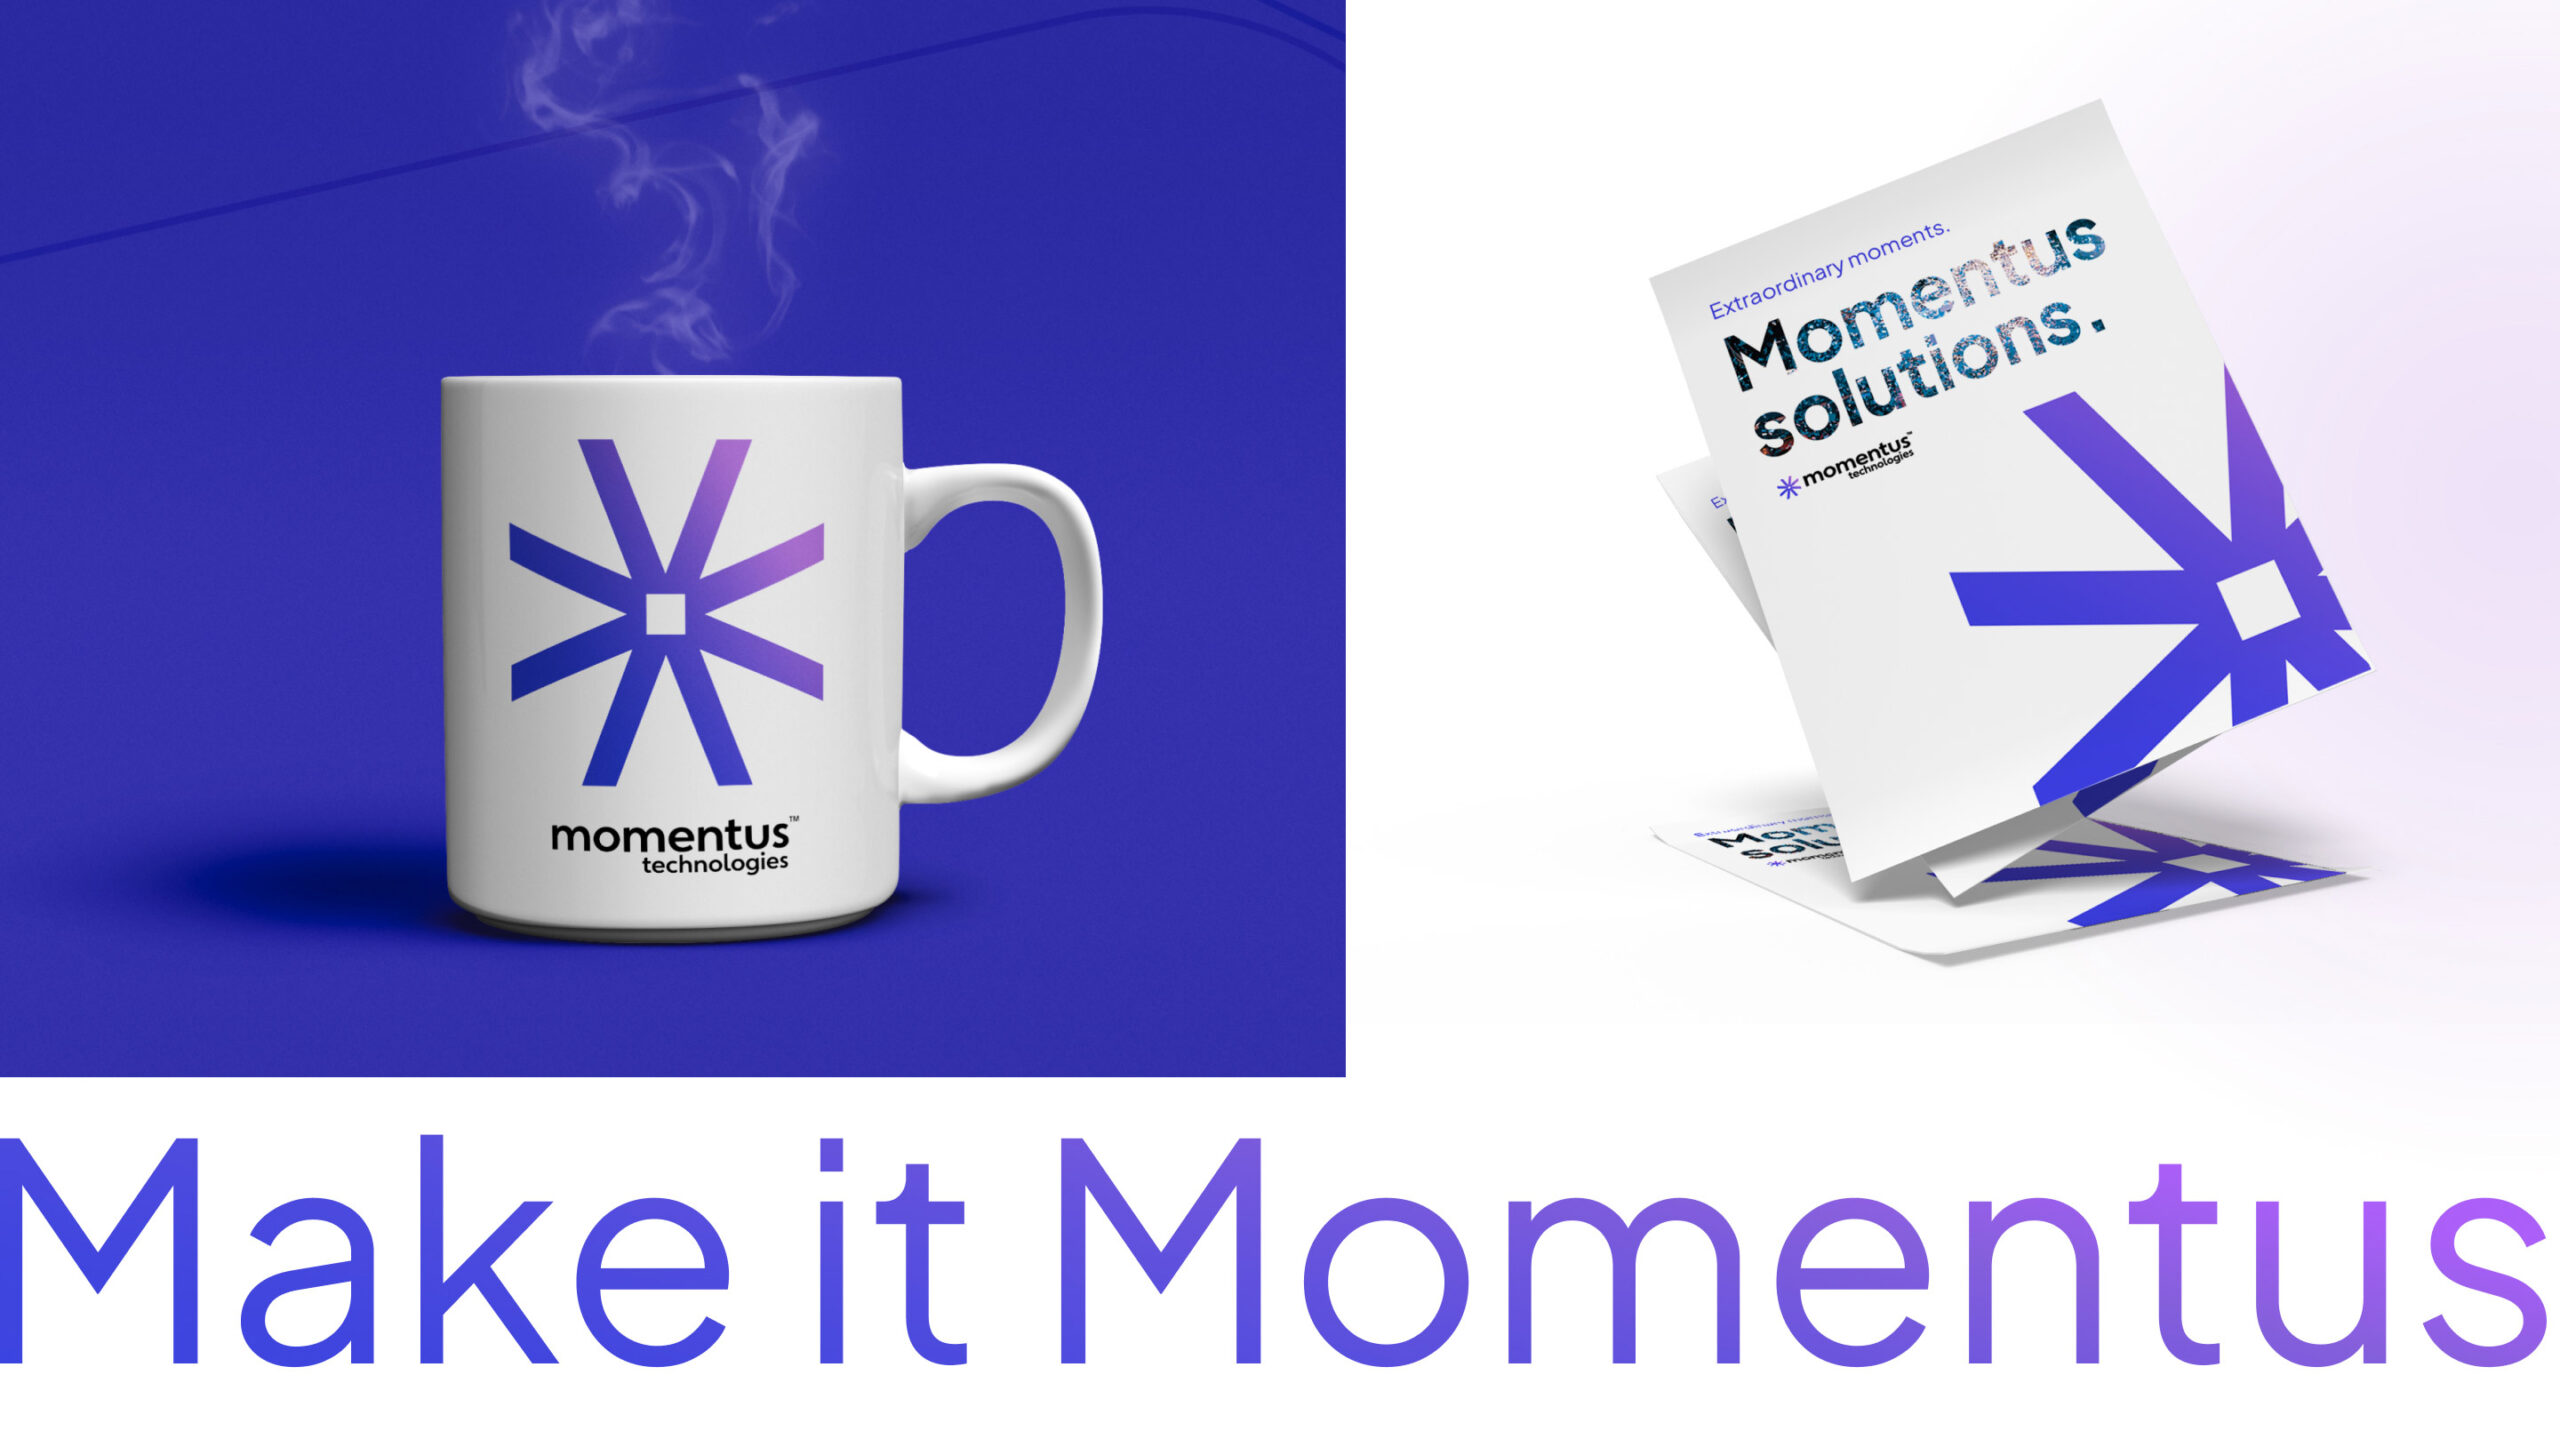 Mockup of a coffee mug and marketing collateral featuring the new Momentus Technologies branding